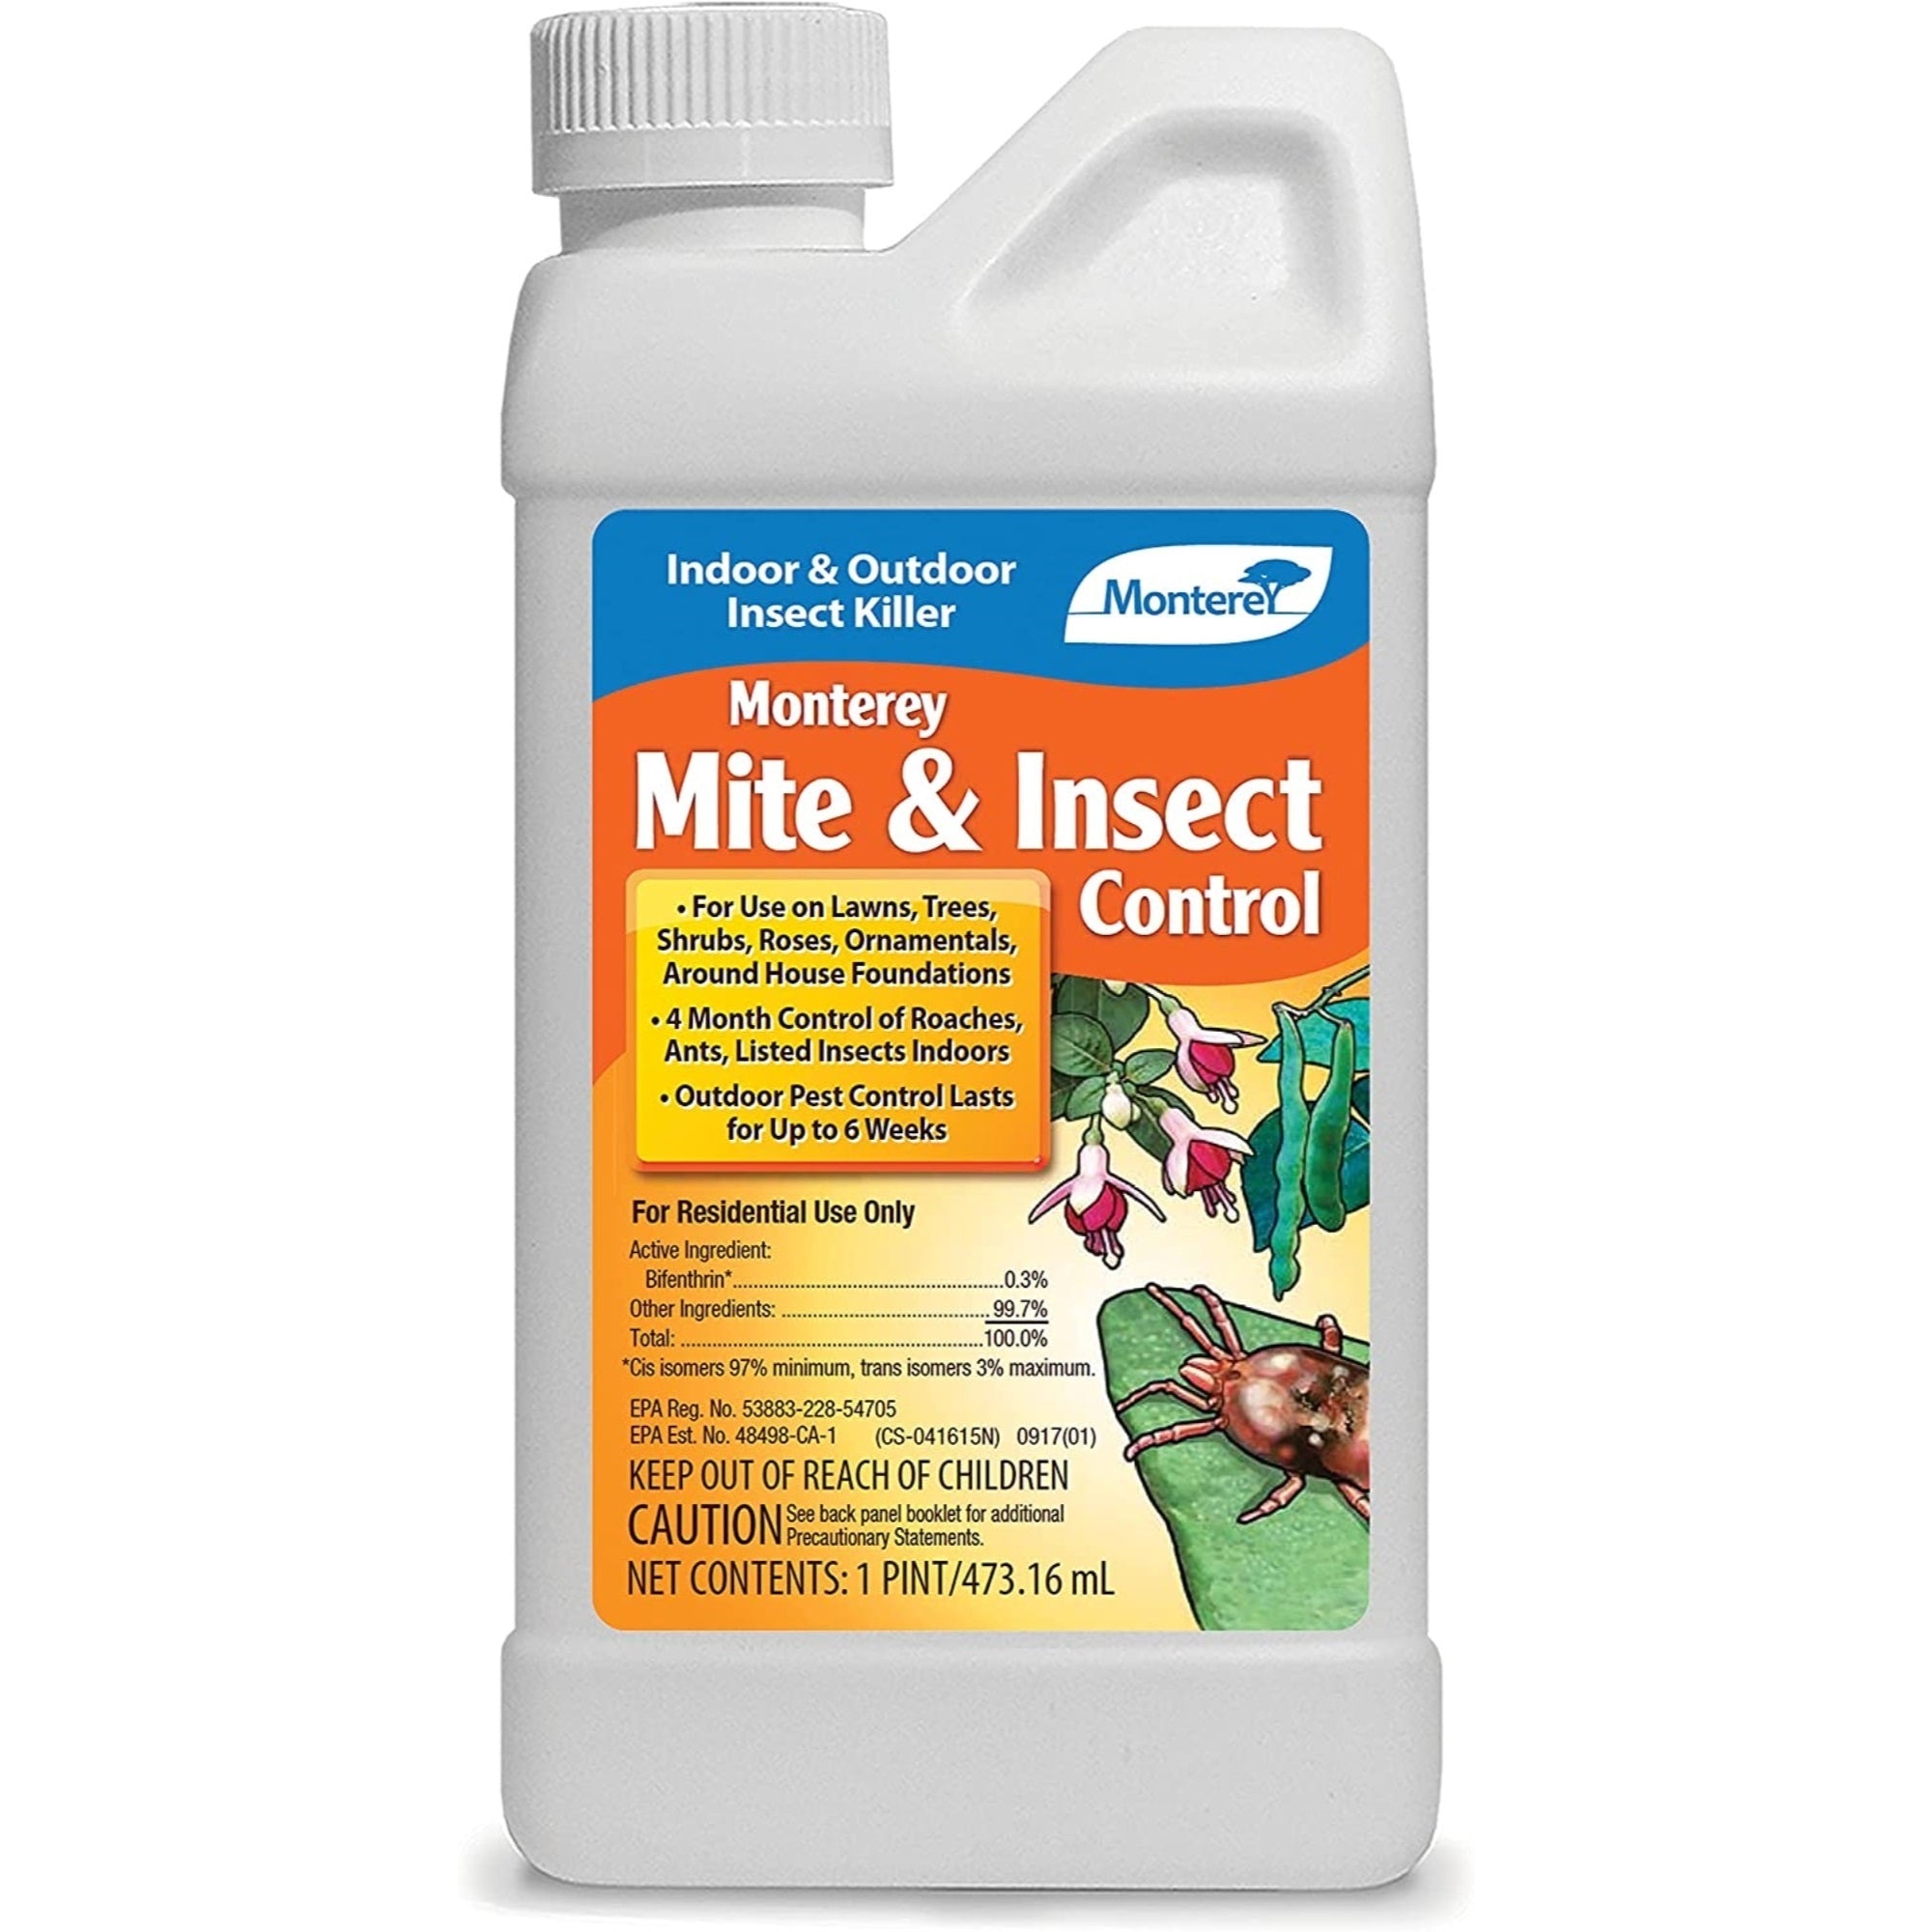 Monterey Mite & Insect Control Insecticide, Concentrate, 16 Ounces